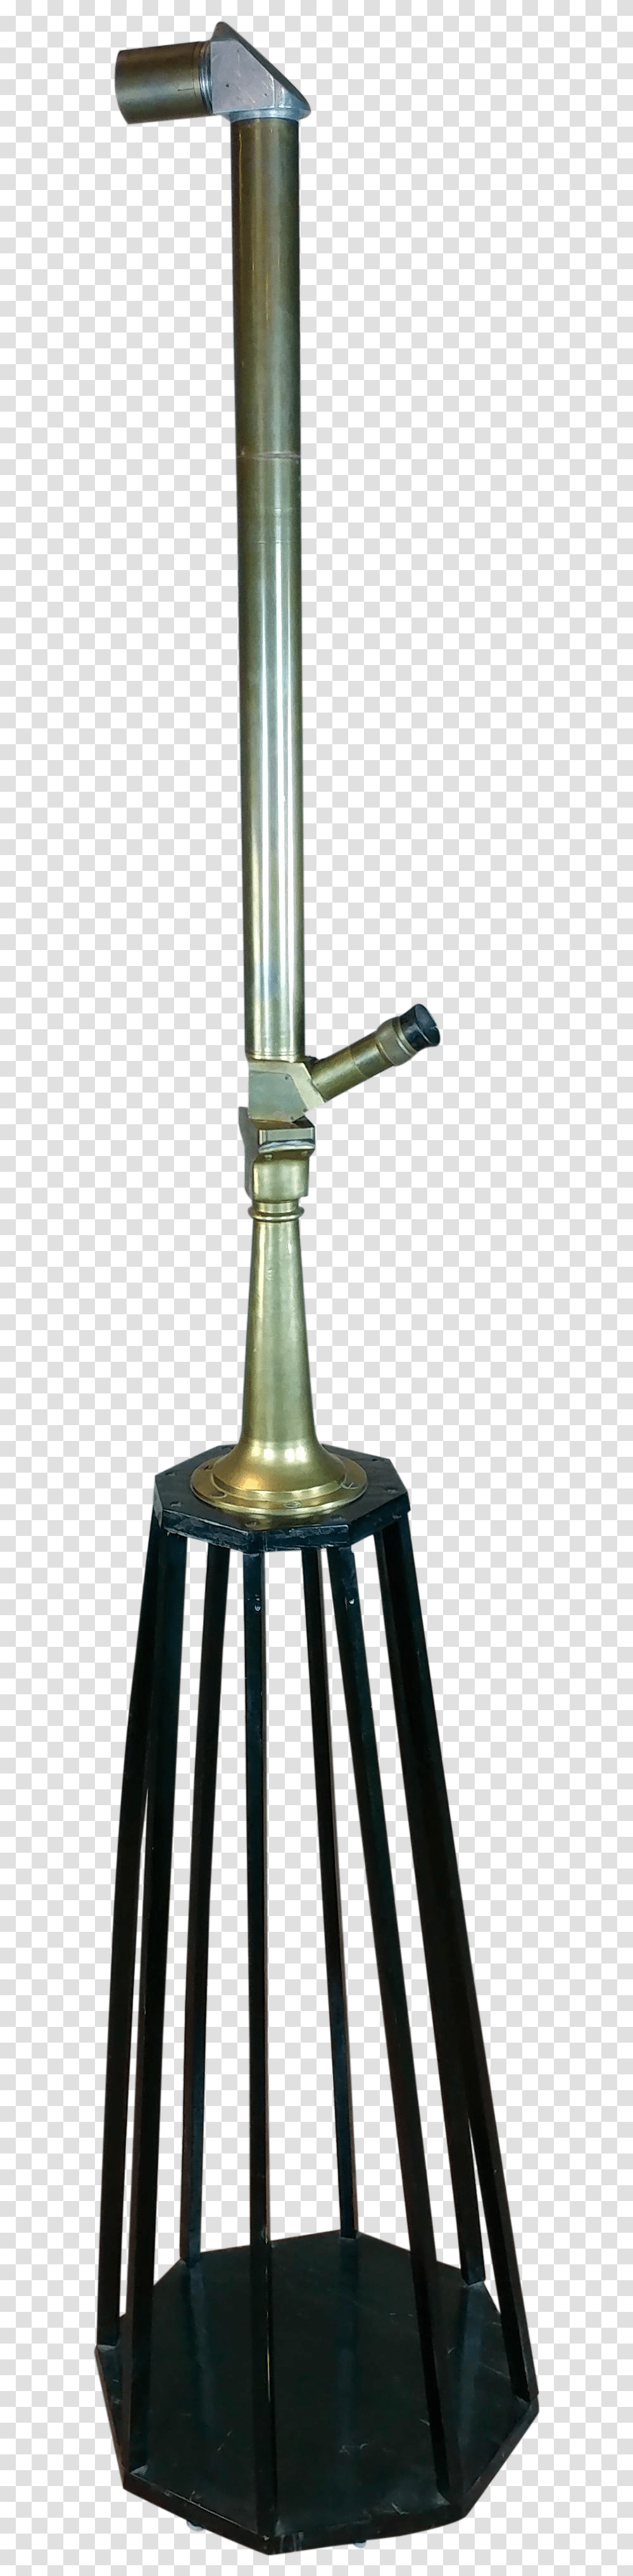 Trenches Drawing Periscope Weeder, Lamp, Bronze, Lamp Post, Goblet Transparent Png